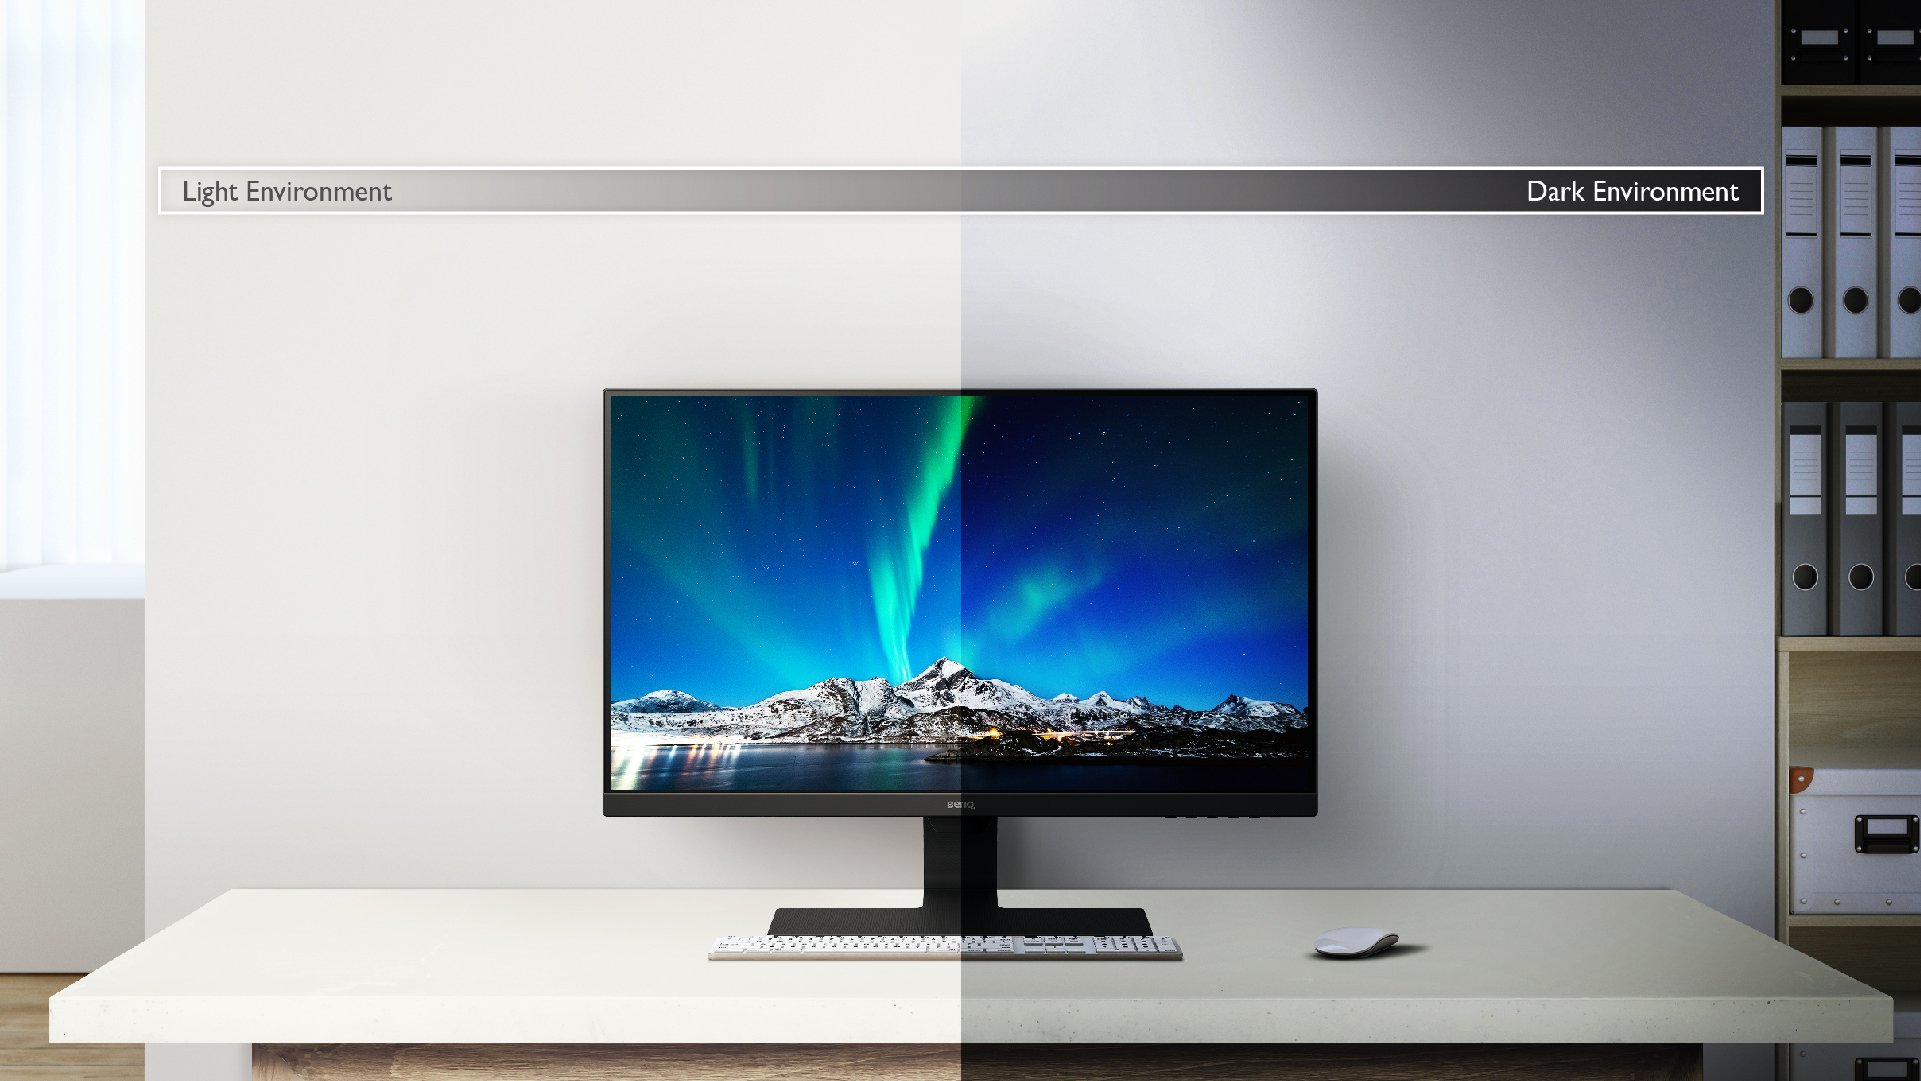 BenQ BL2780 Brightness Intelligence actively adjusts screen brightness for comfortable viewing experiences.